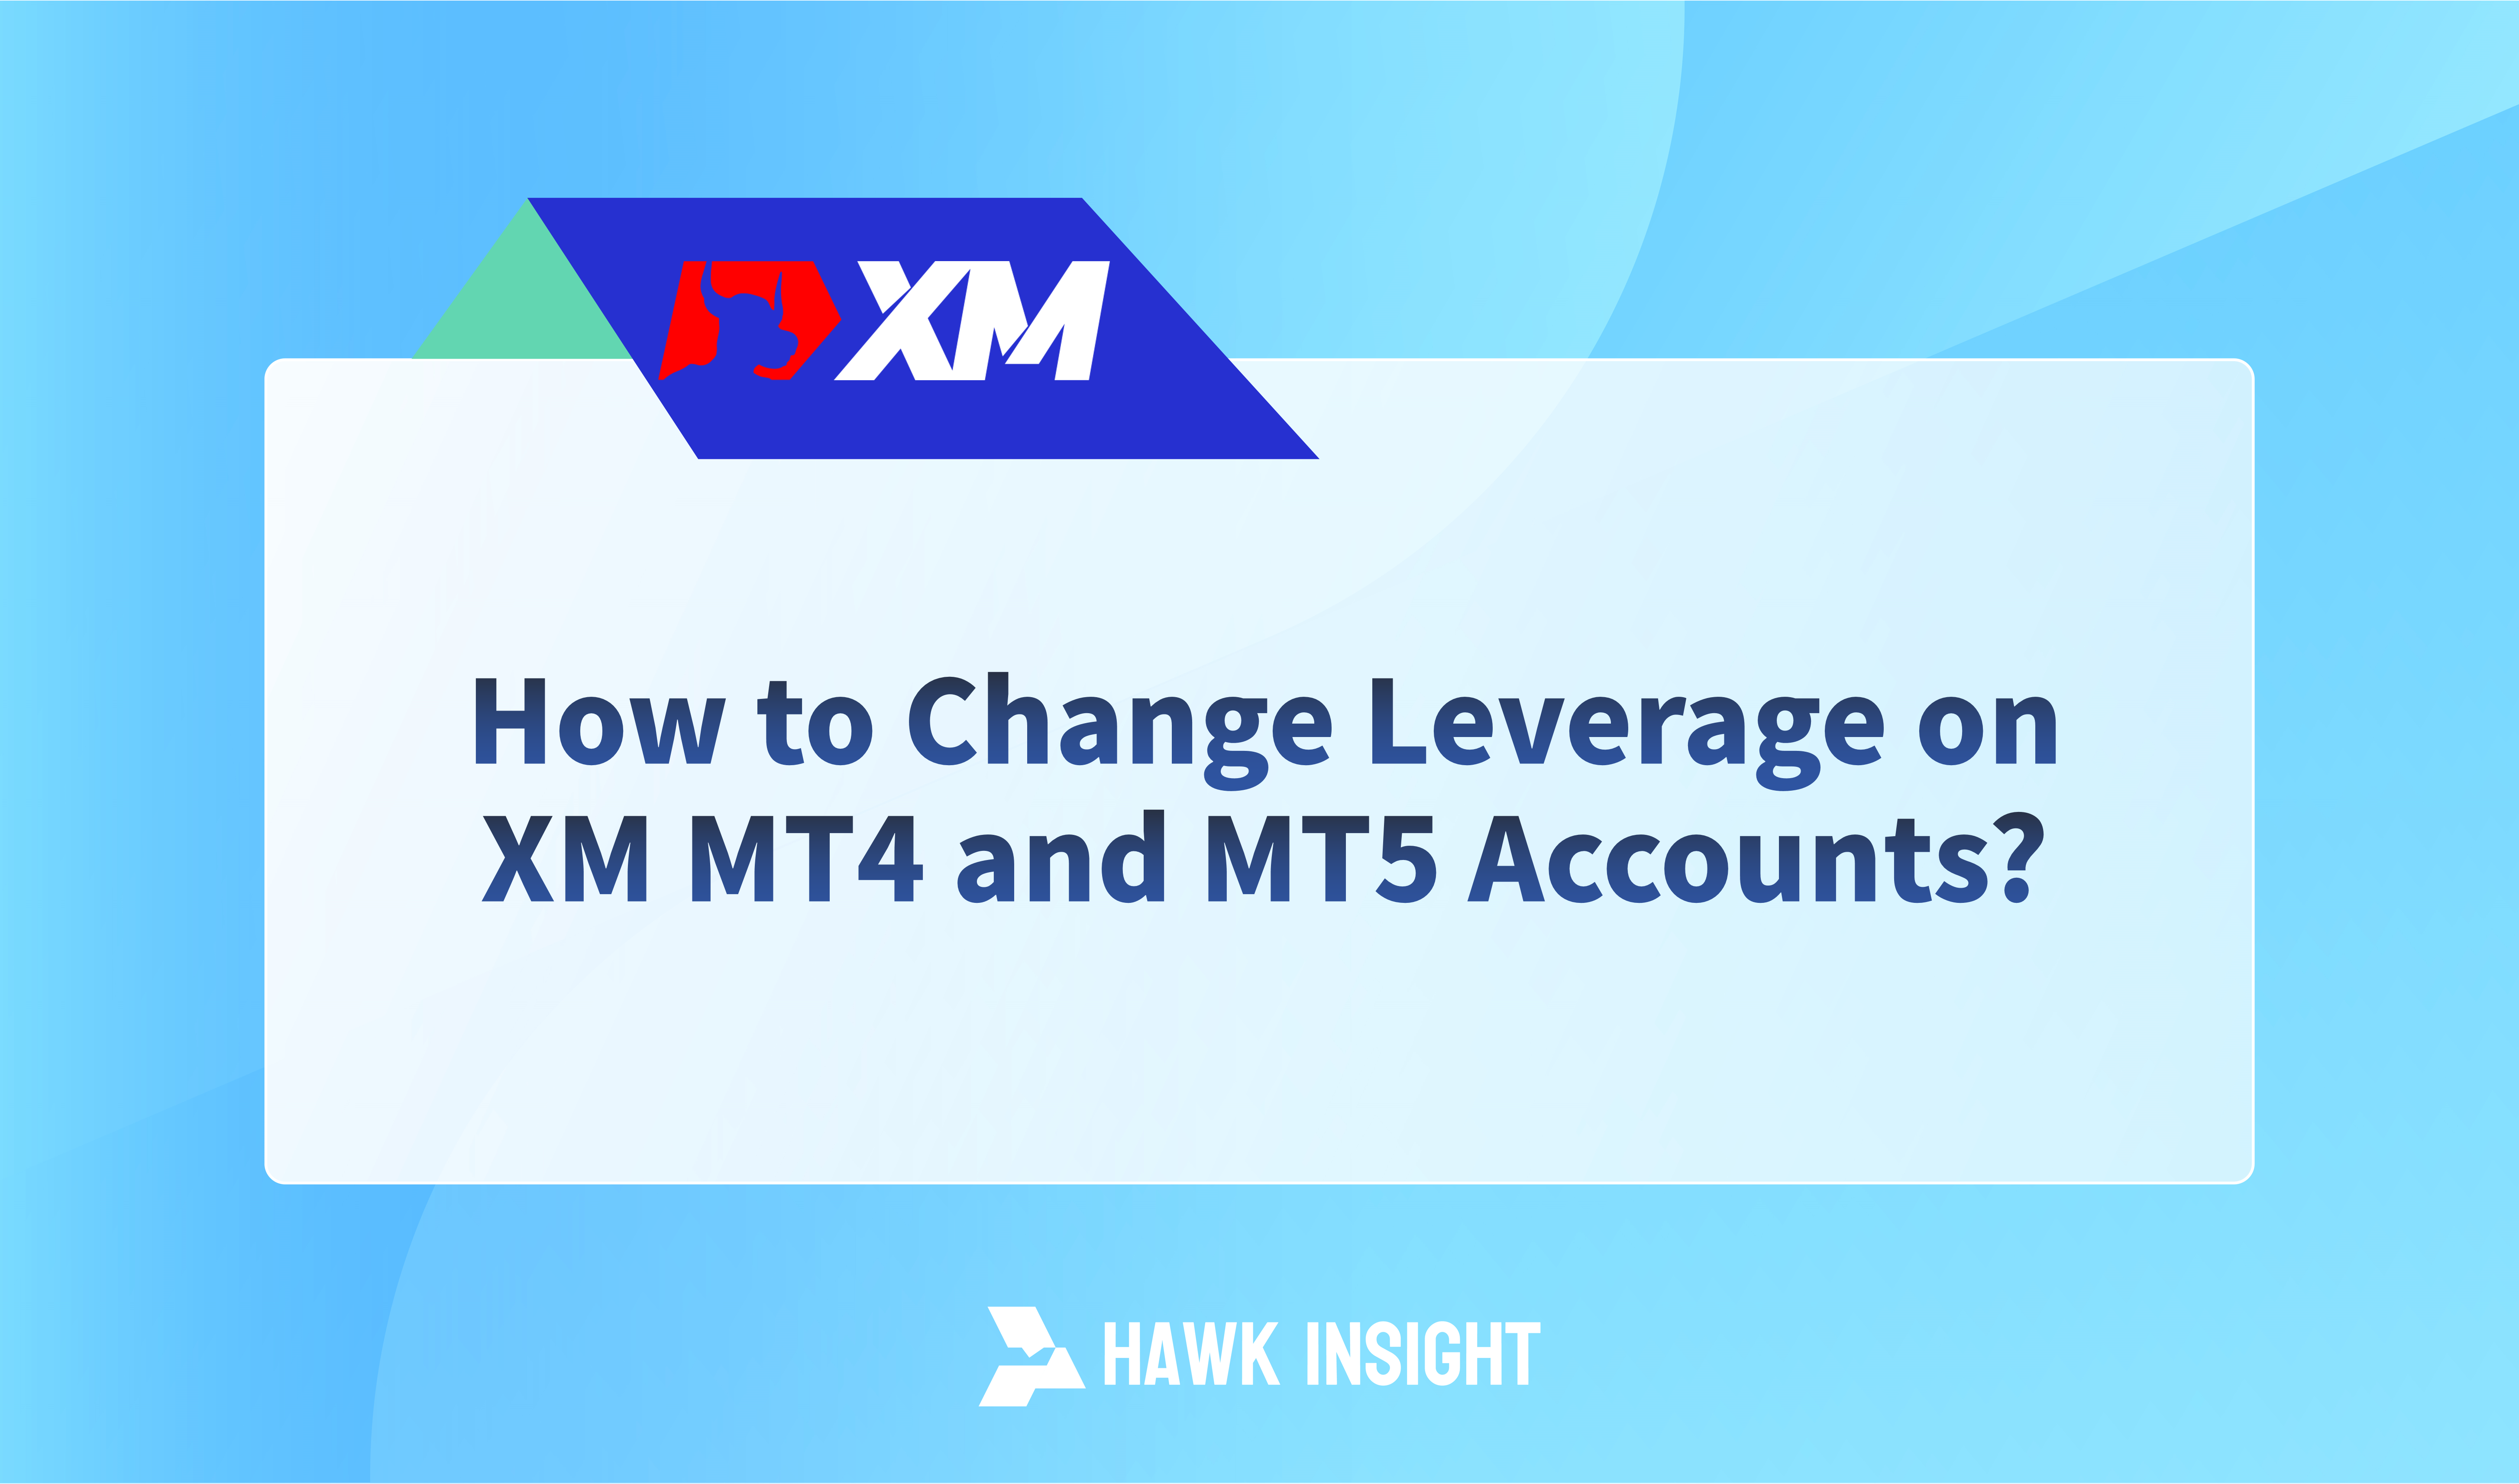 How to Change Leverage on XM MT4 and MT5 Accounts?